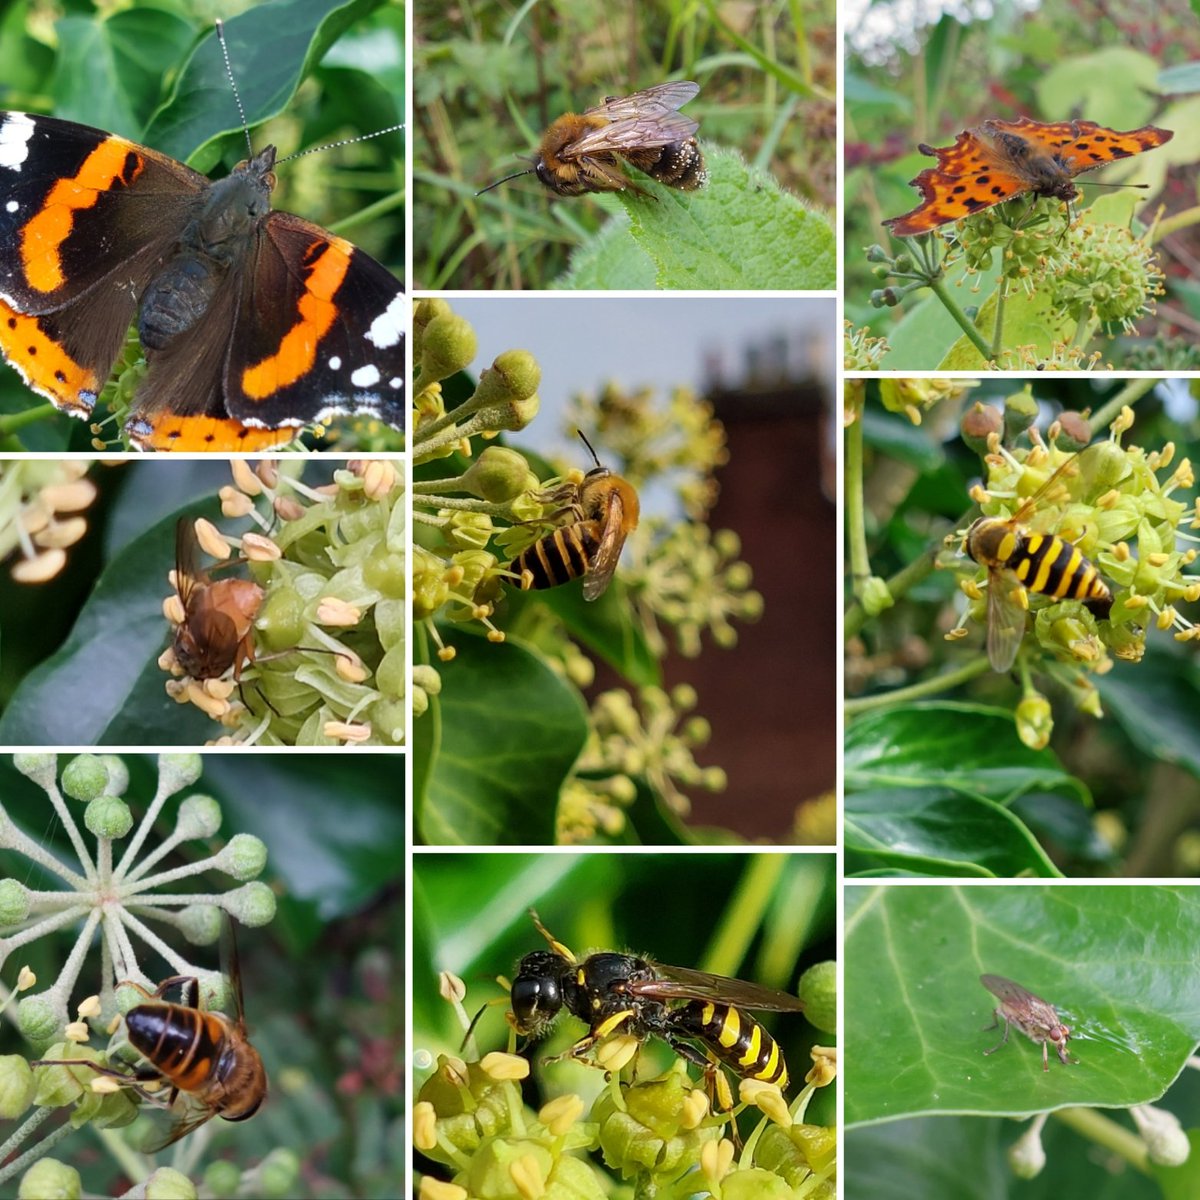 A rich diversity of autumn insects benefits from abundant ivy flowers. Red admirals are frequent, also comma, small white & no doubt some moths too. Hoverflies & houseflies, 100s of common wasp, Ichneumon, Ectemnius spp. & Field digger wasps, Ivy & buffish mining bees.